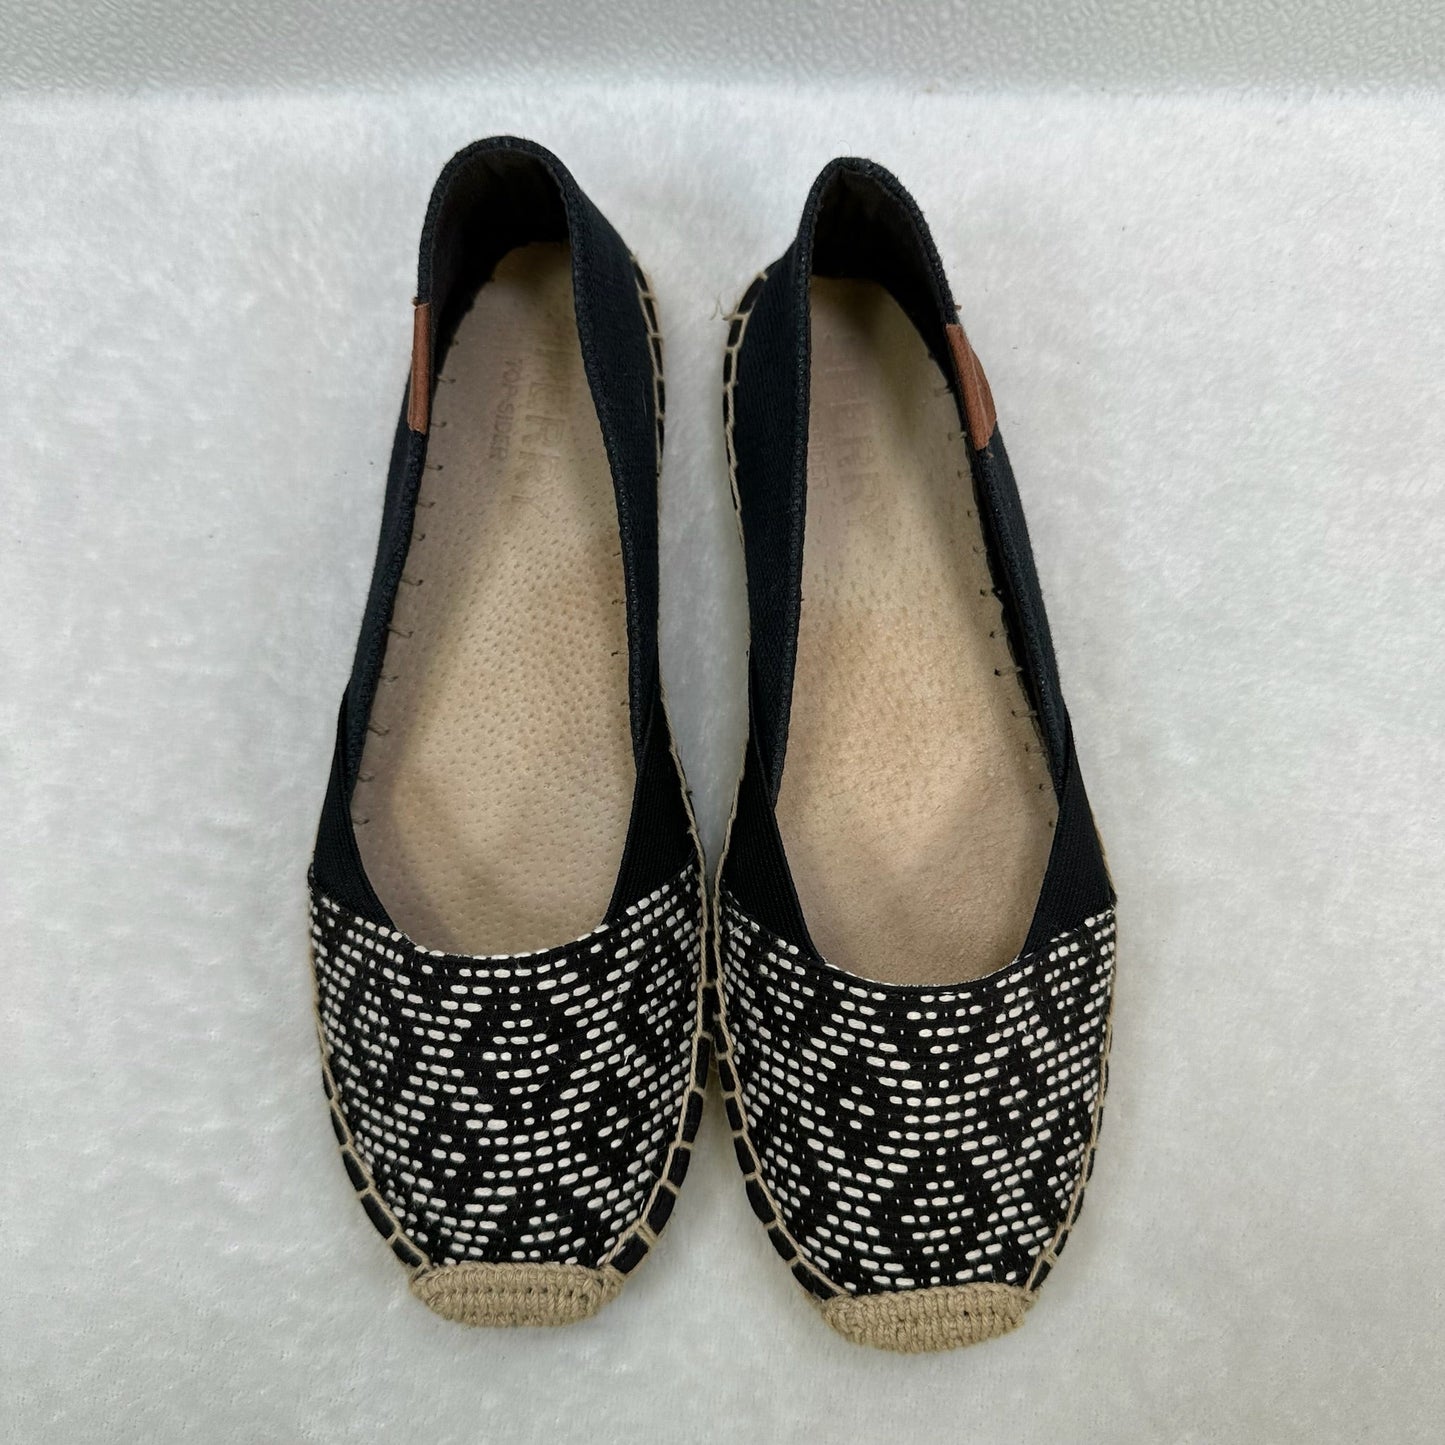 Sandals Flats By Sperry  Size: 6.5